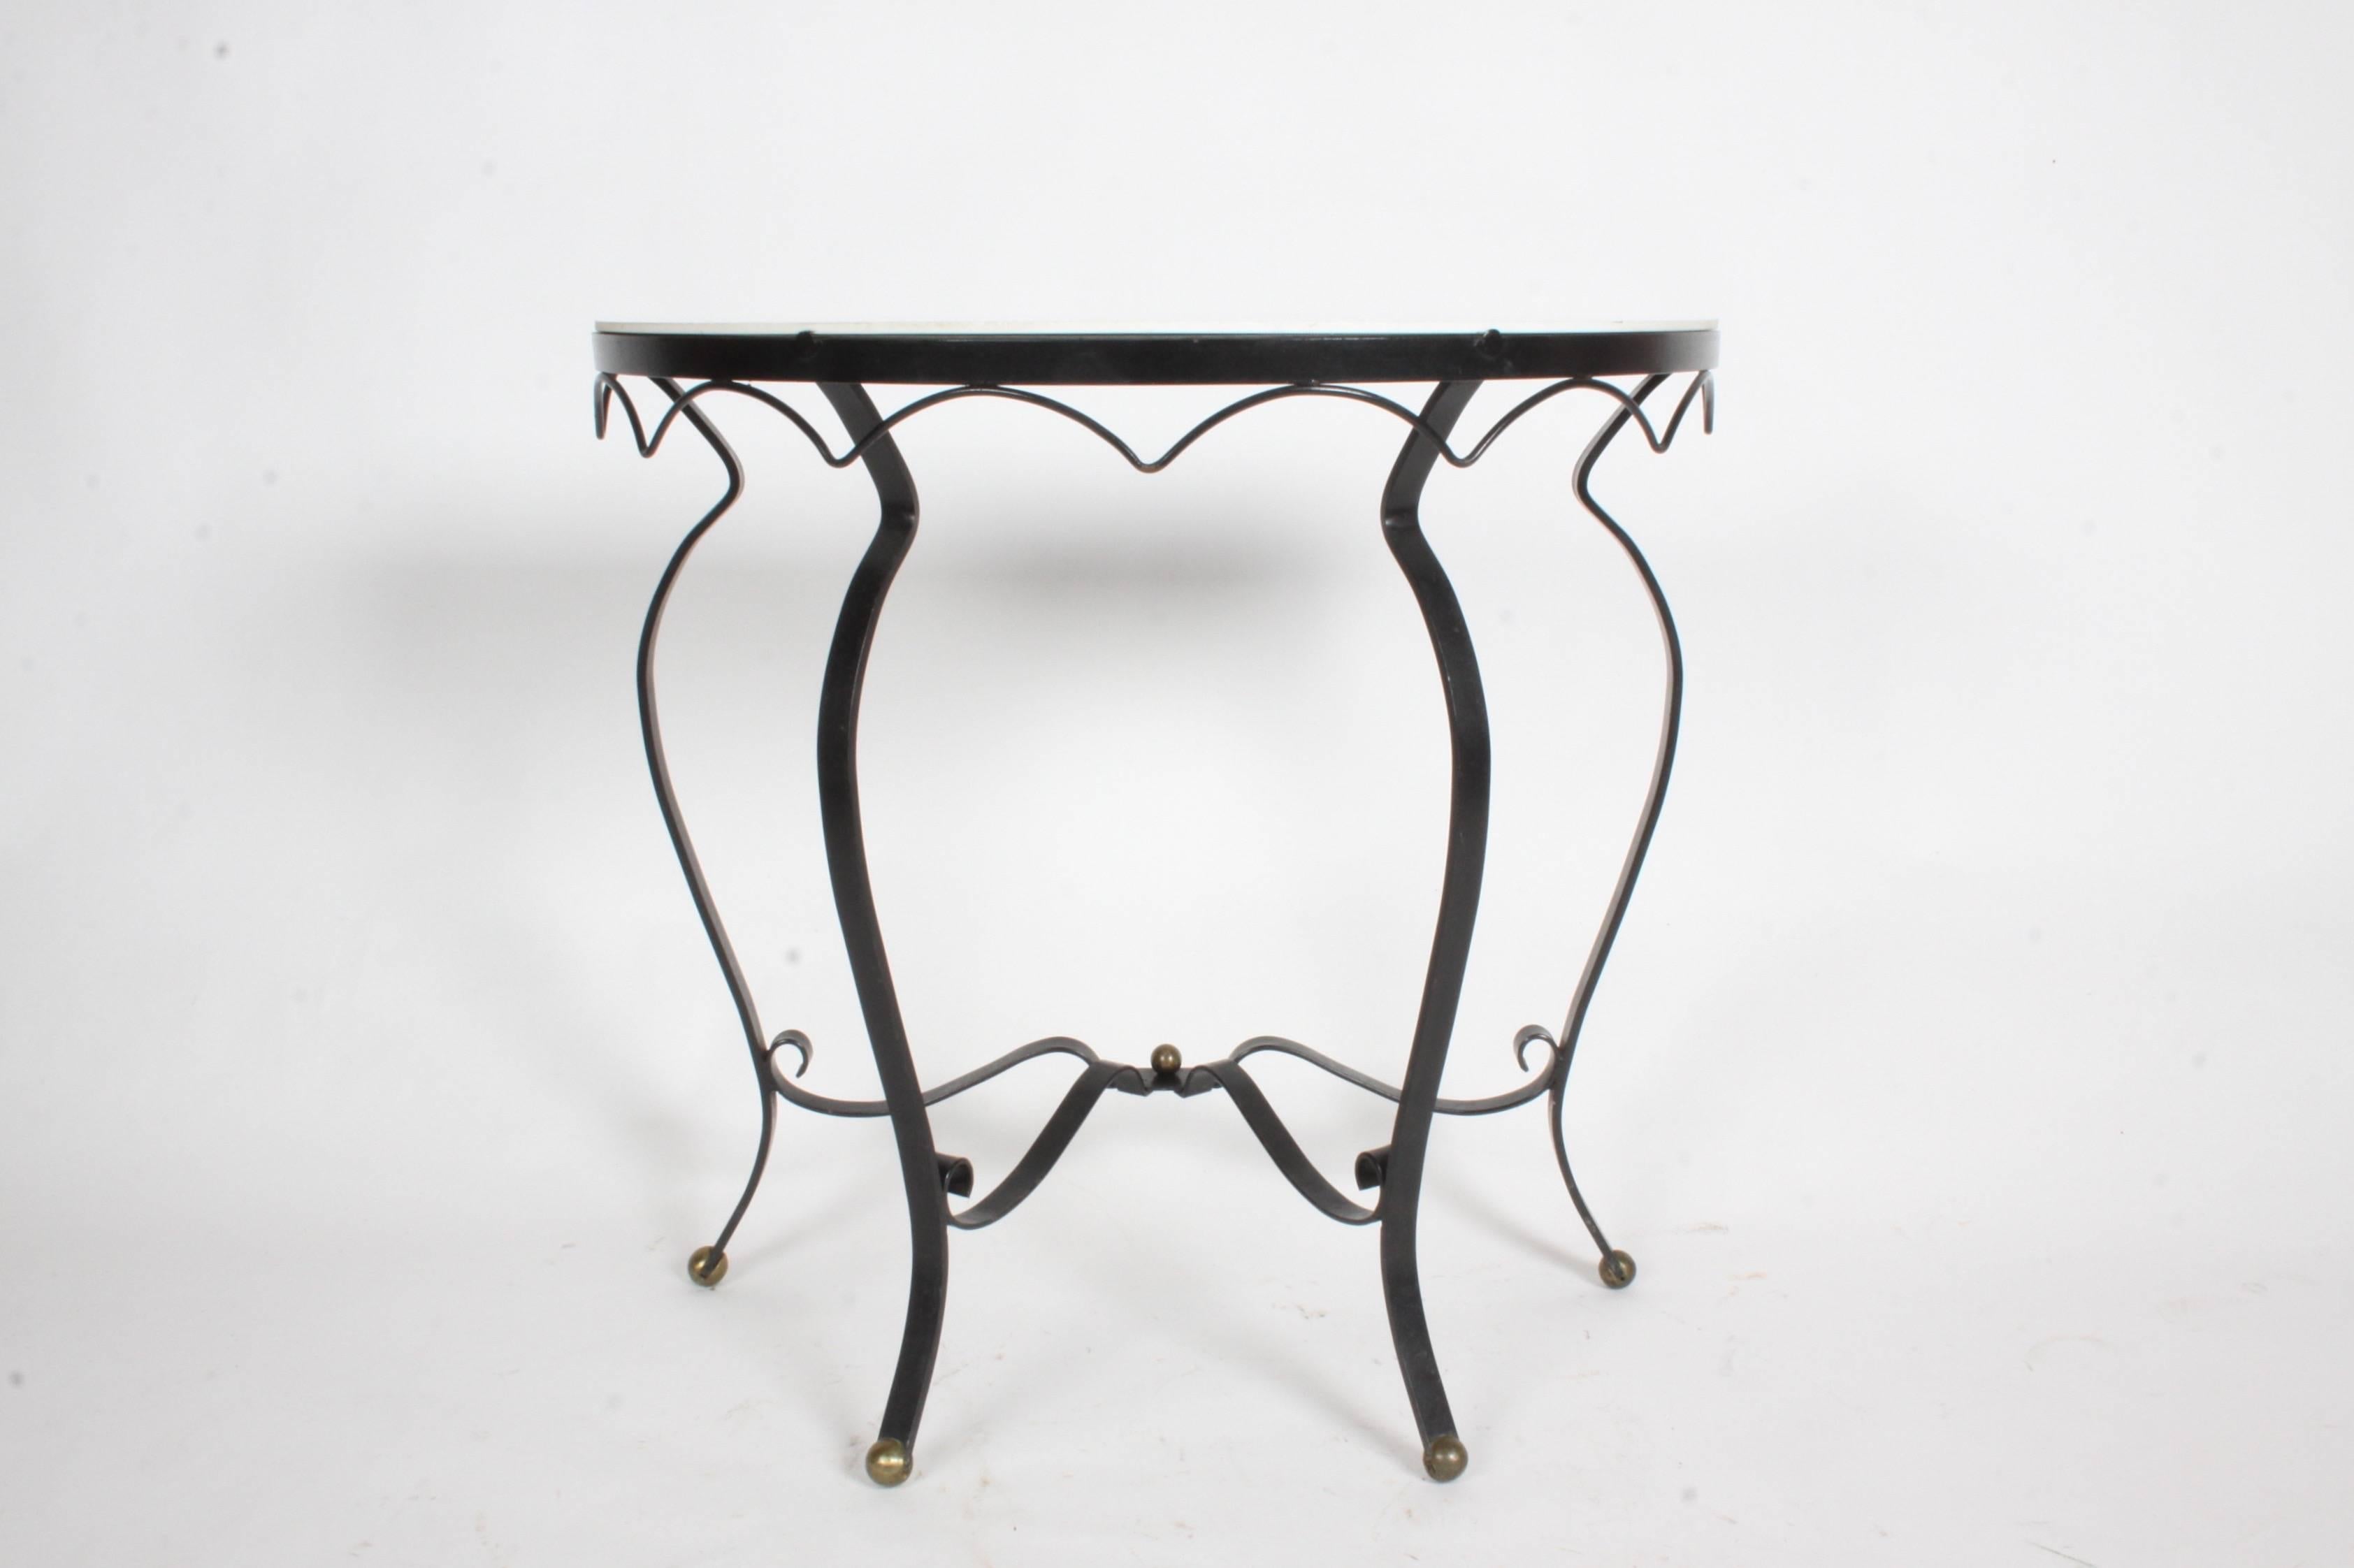 French Deco style wrought iron and vitrolite demilune console 1940s with brass ball details. Some loss of paint. No chips to vitrolite. Mid-Century Modern.